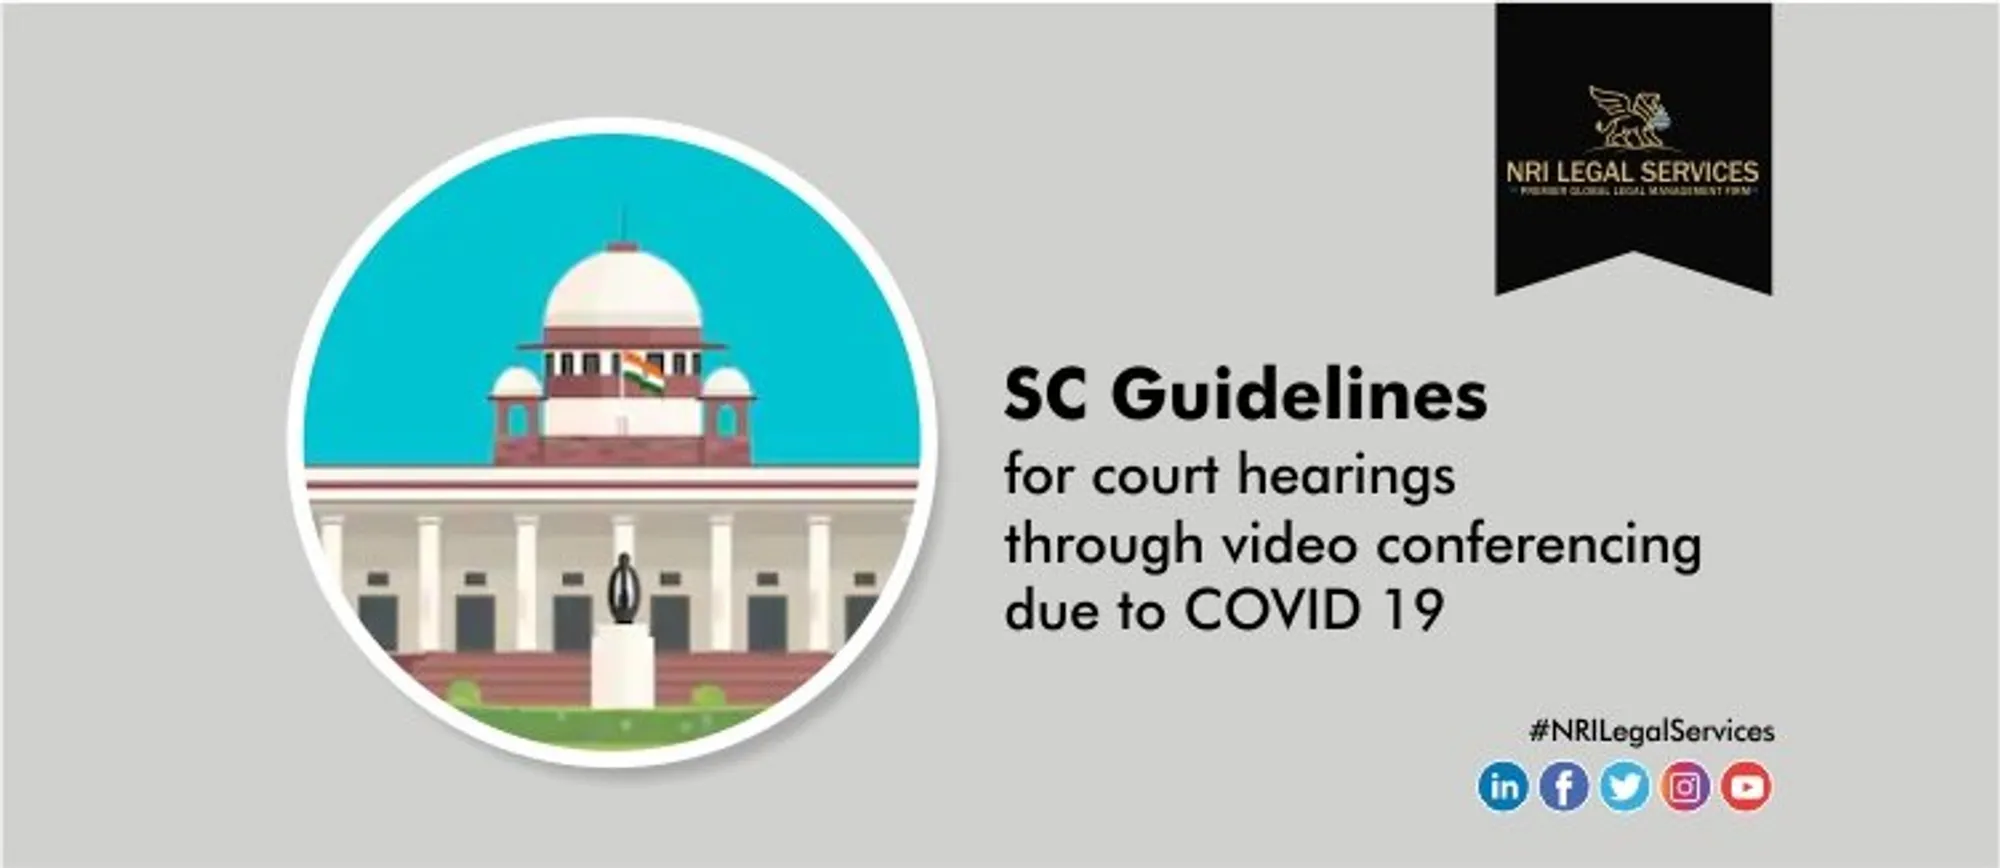 SC guidelines for court hearings through video conferencing due to COVID 19